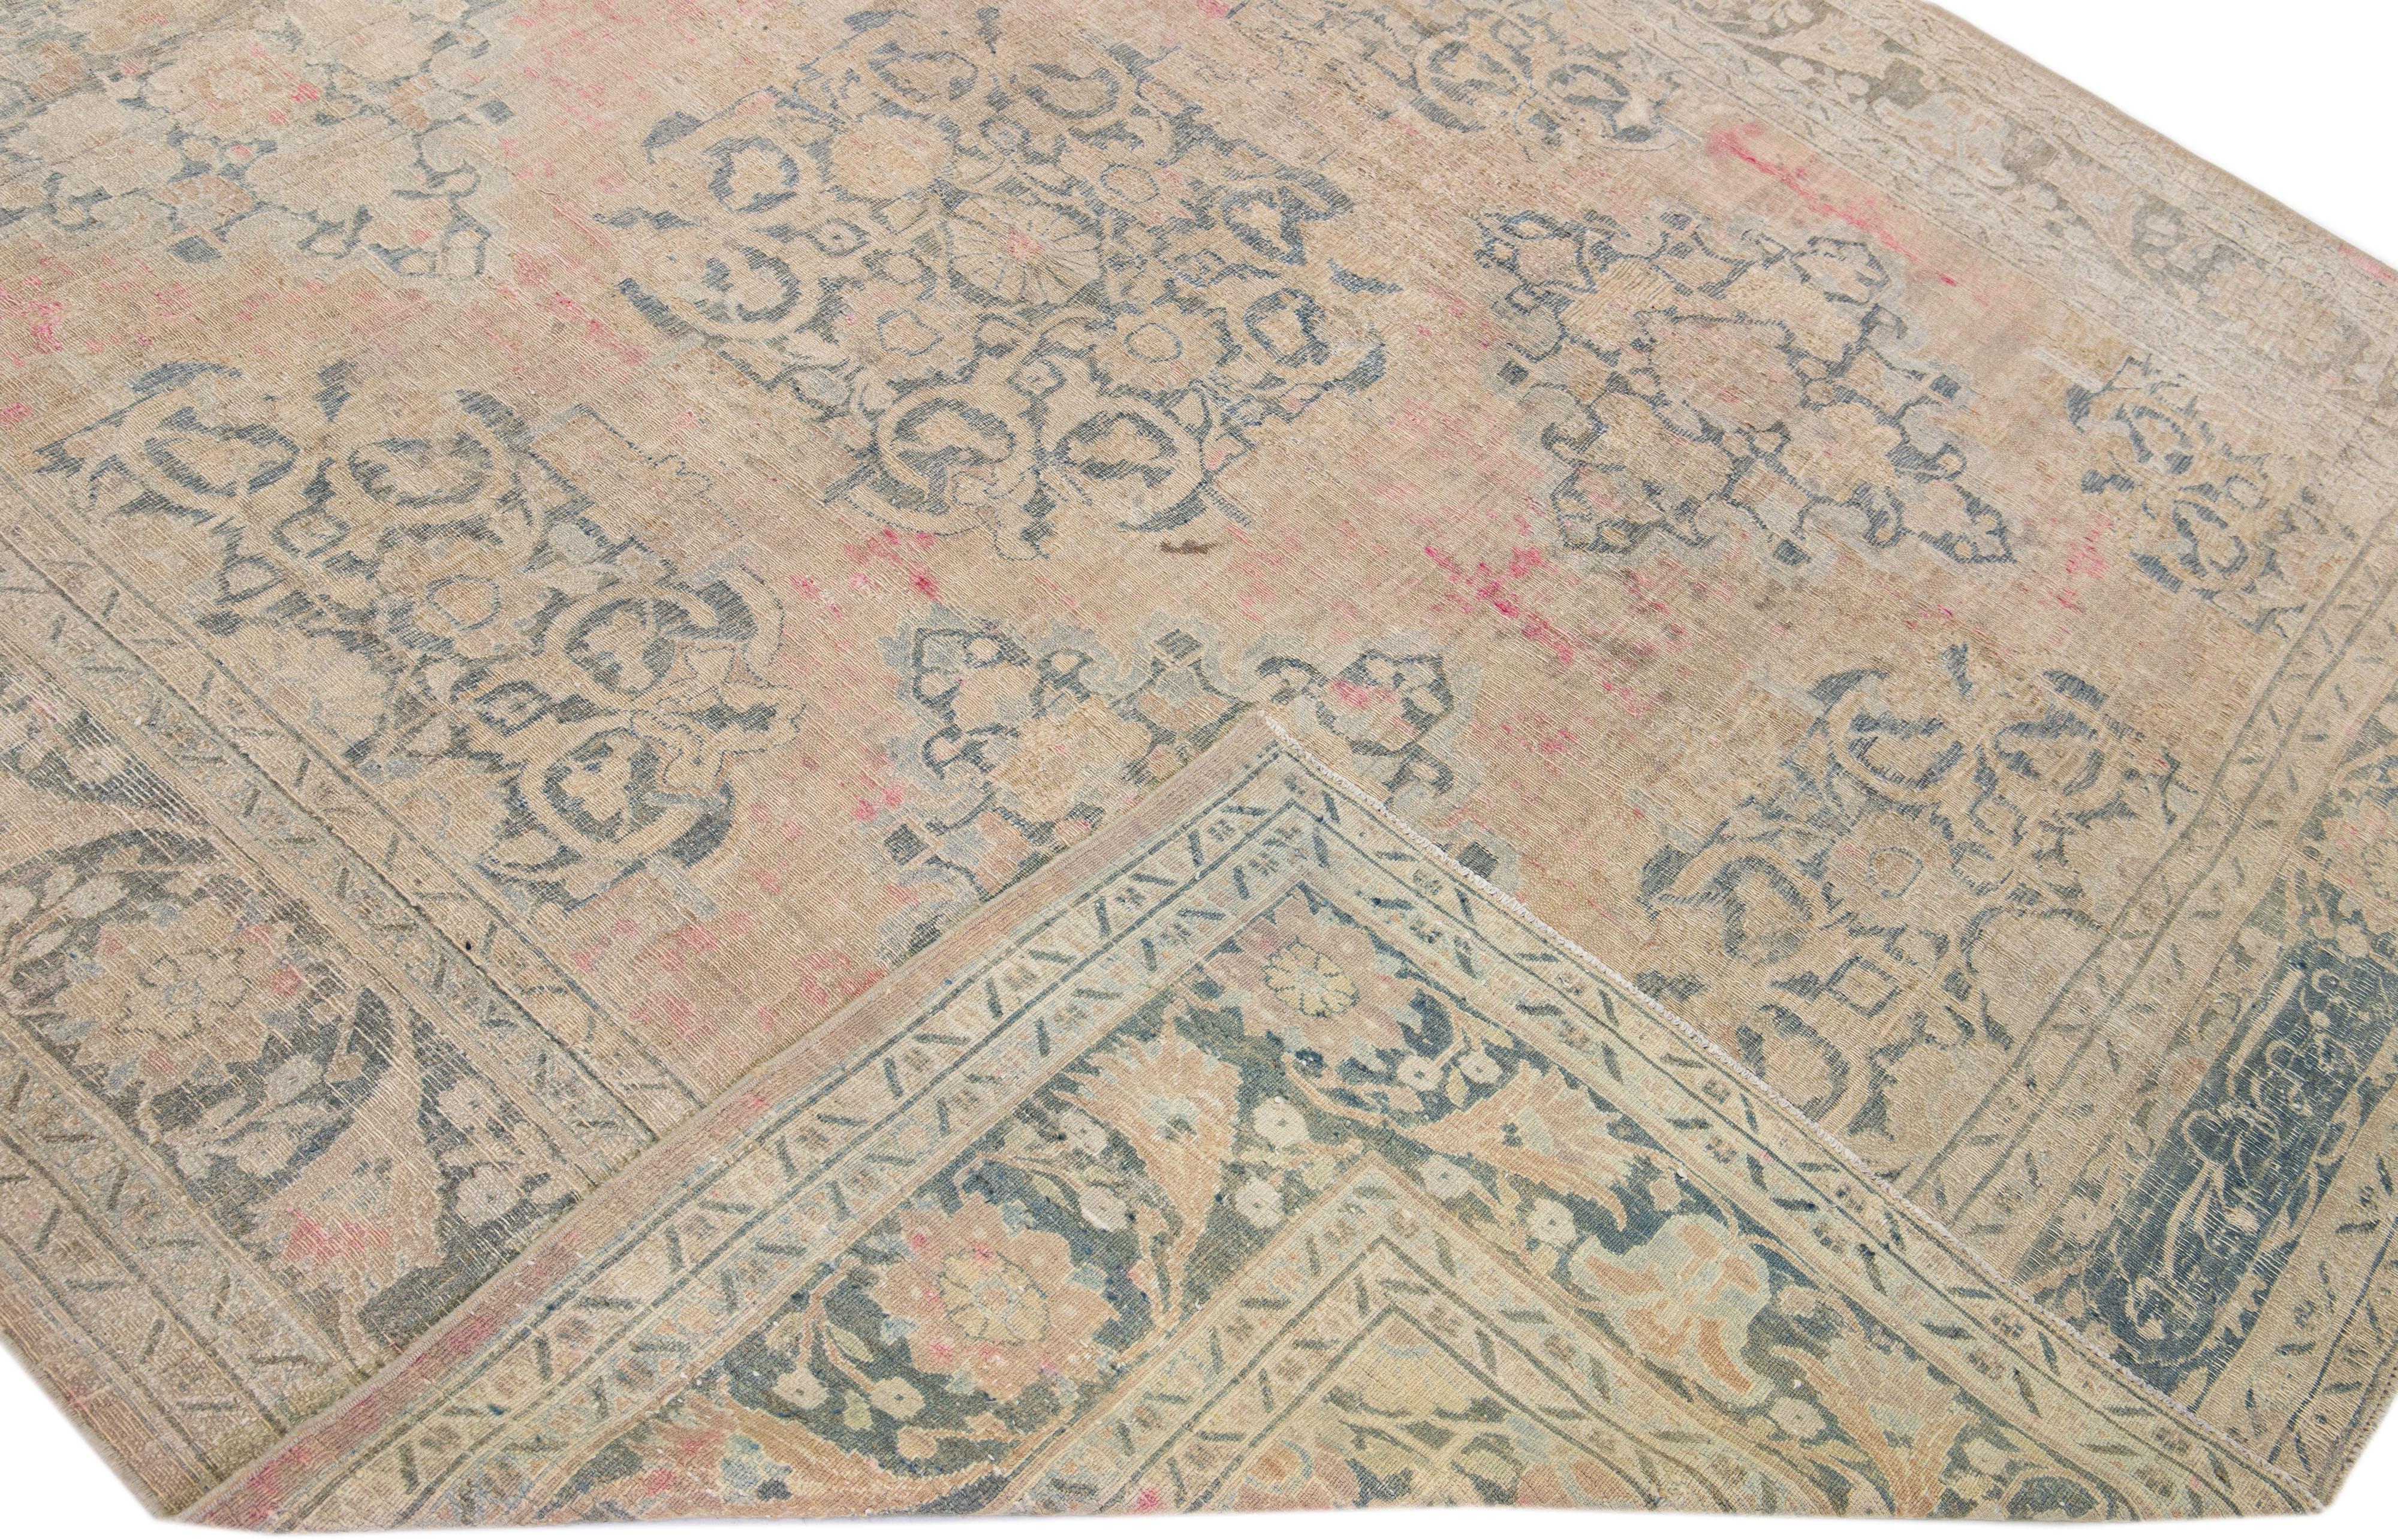 Beautiful antique Doroksh hand-knotted wool rug with a beige color field. This Persian rug has blue and pink accents in an allover floral pattern. 

This rug measures 7'8